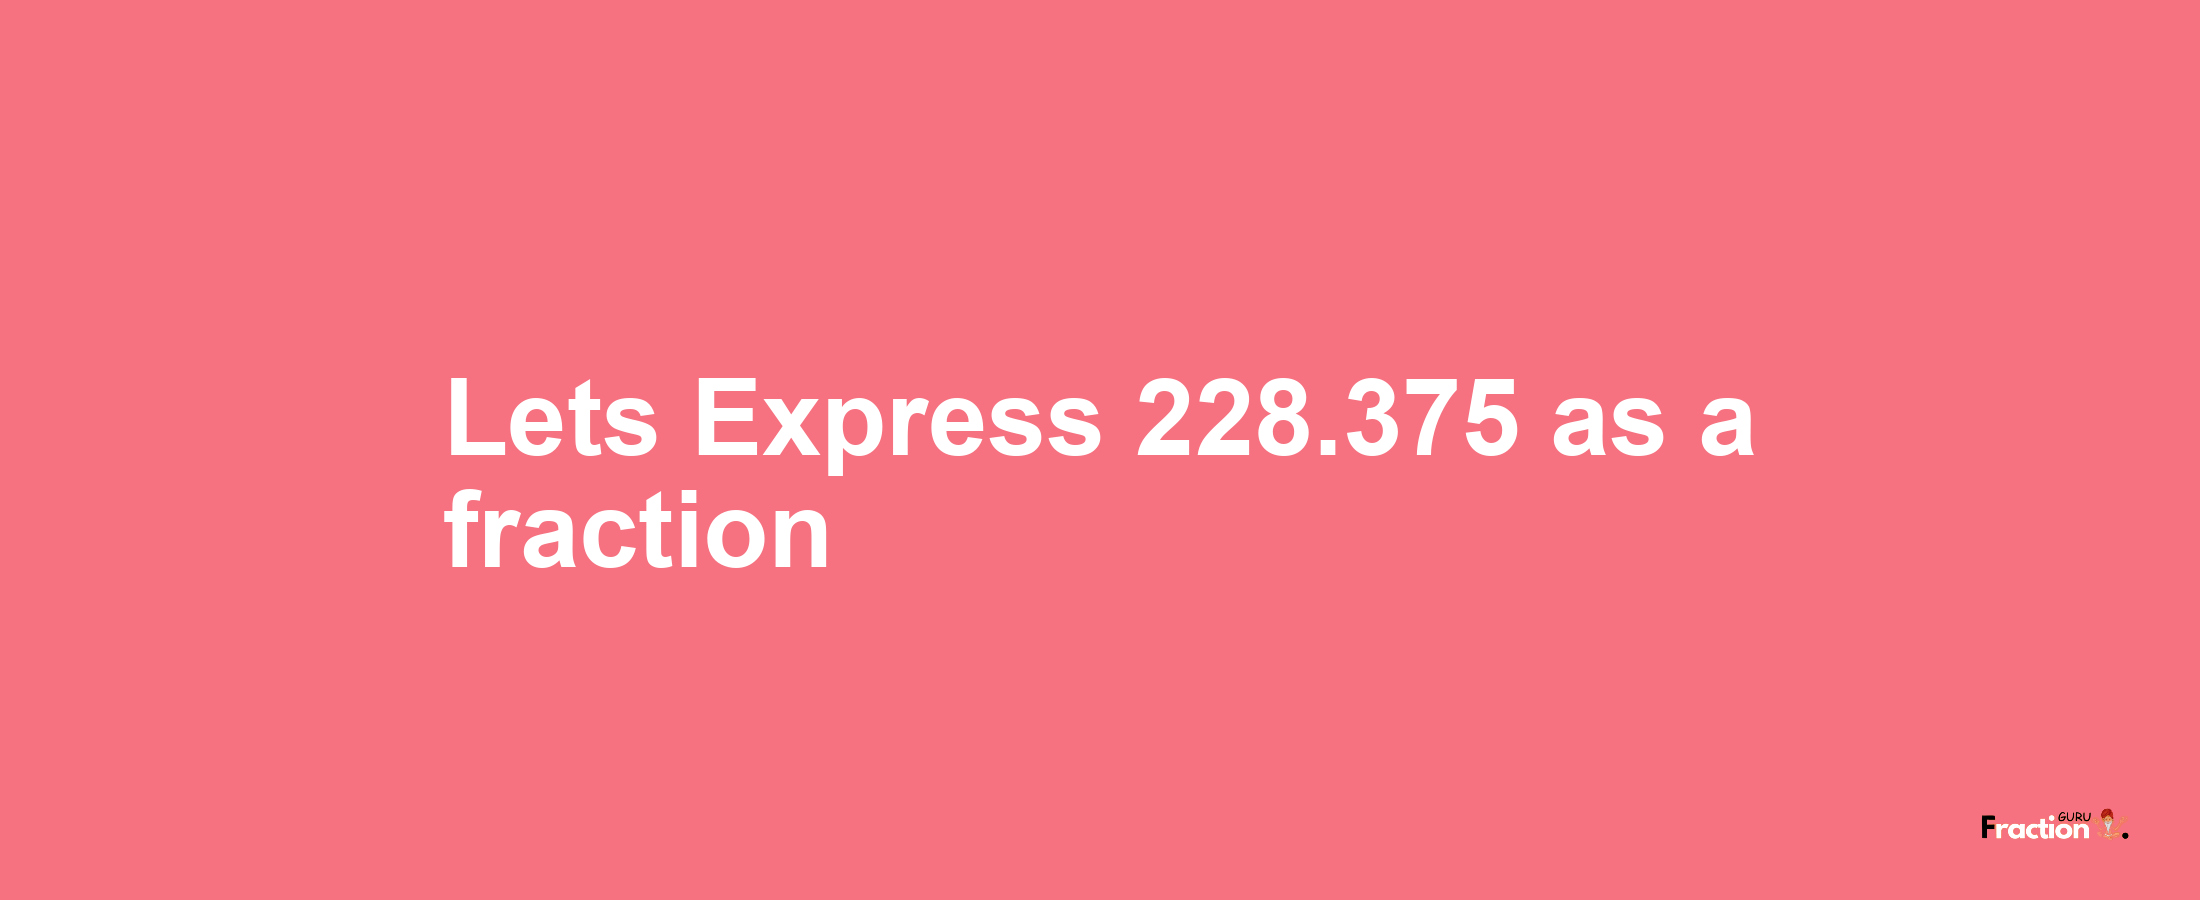 Lets Express 228.375 as afraction